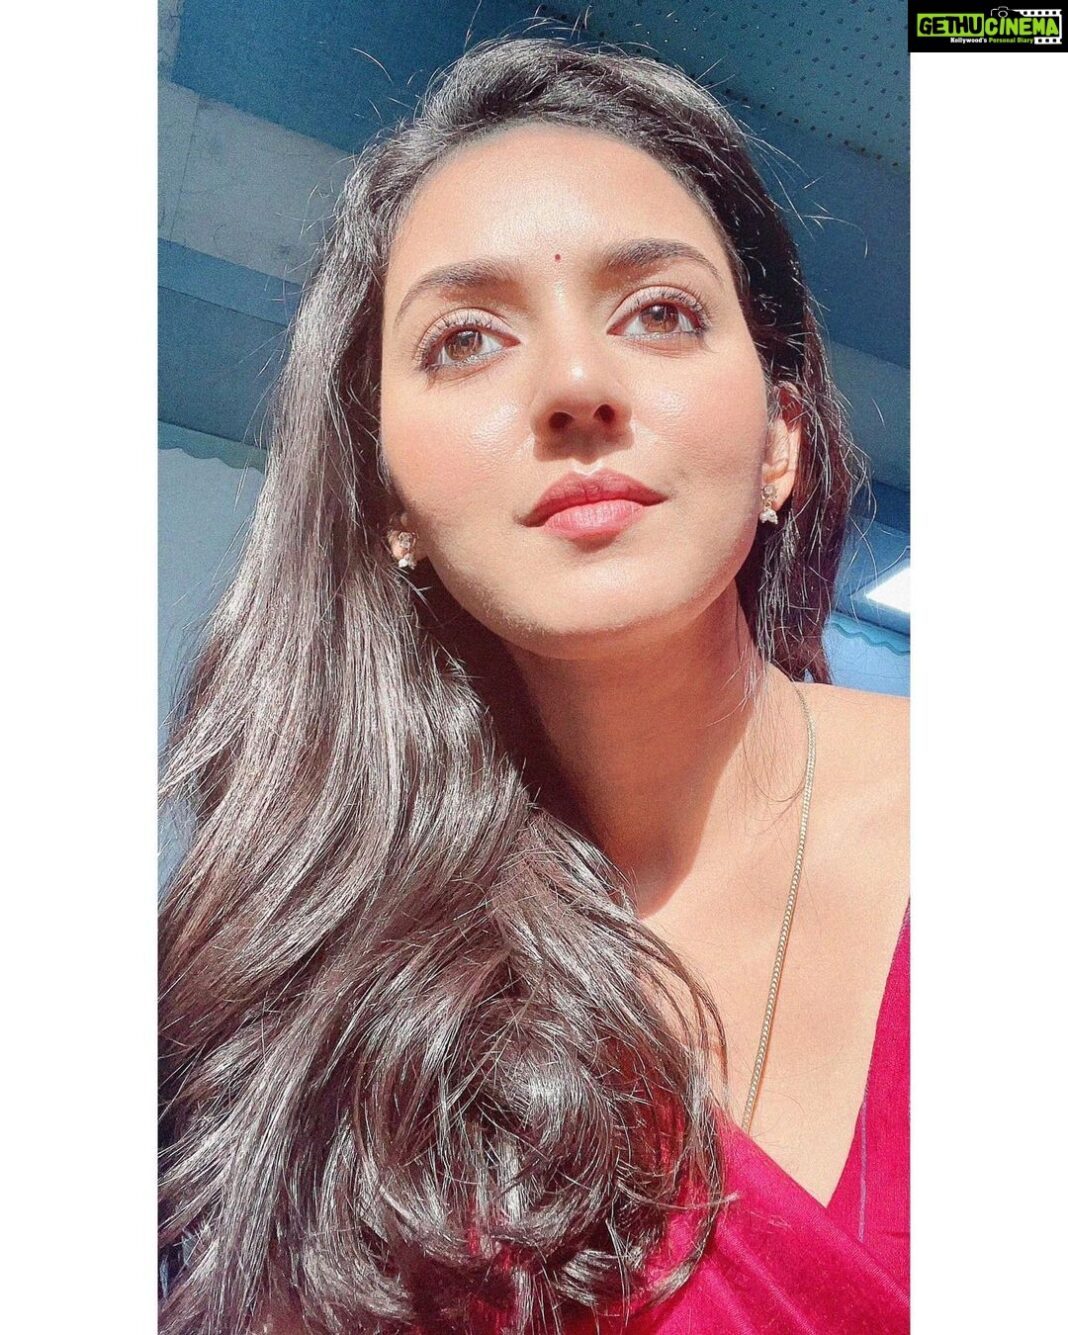 Vidya Pradeep Instagram - 🌞“Take a deep breath in, Feel the sun on your soul. Start fresh today, Make peace your goal!” #instaquotes